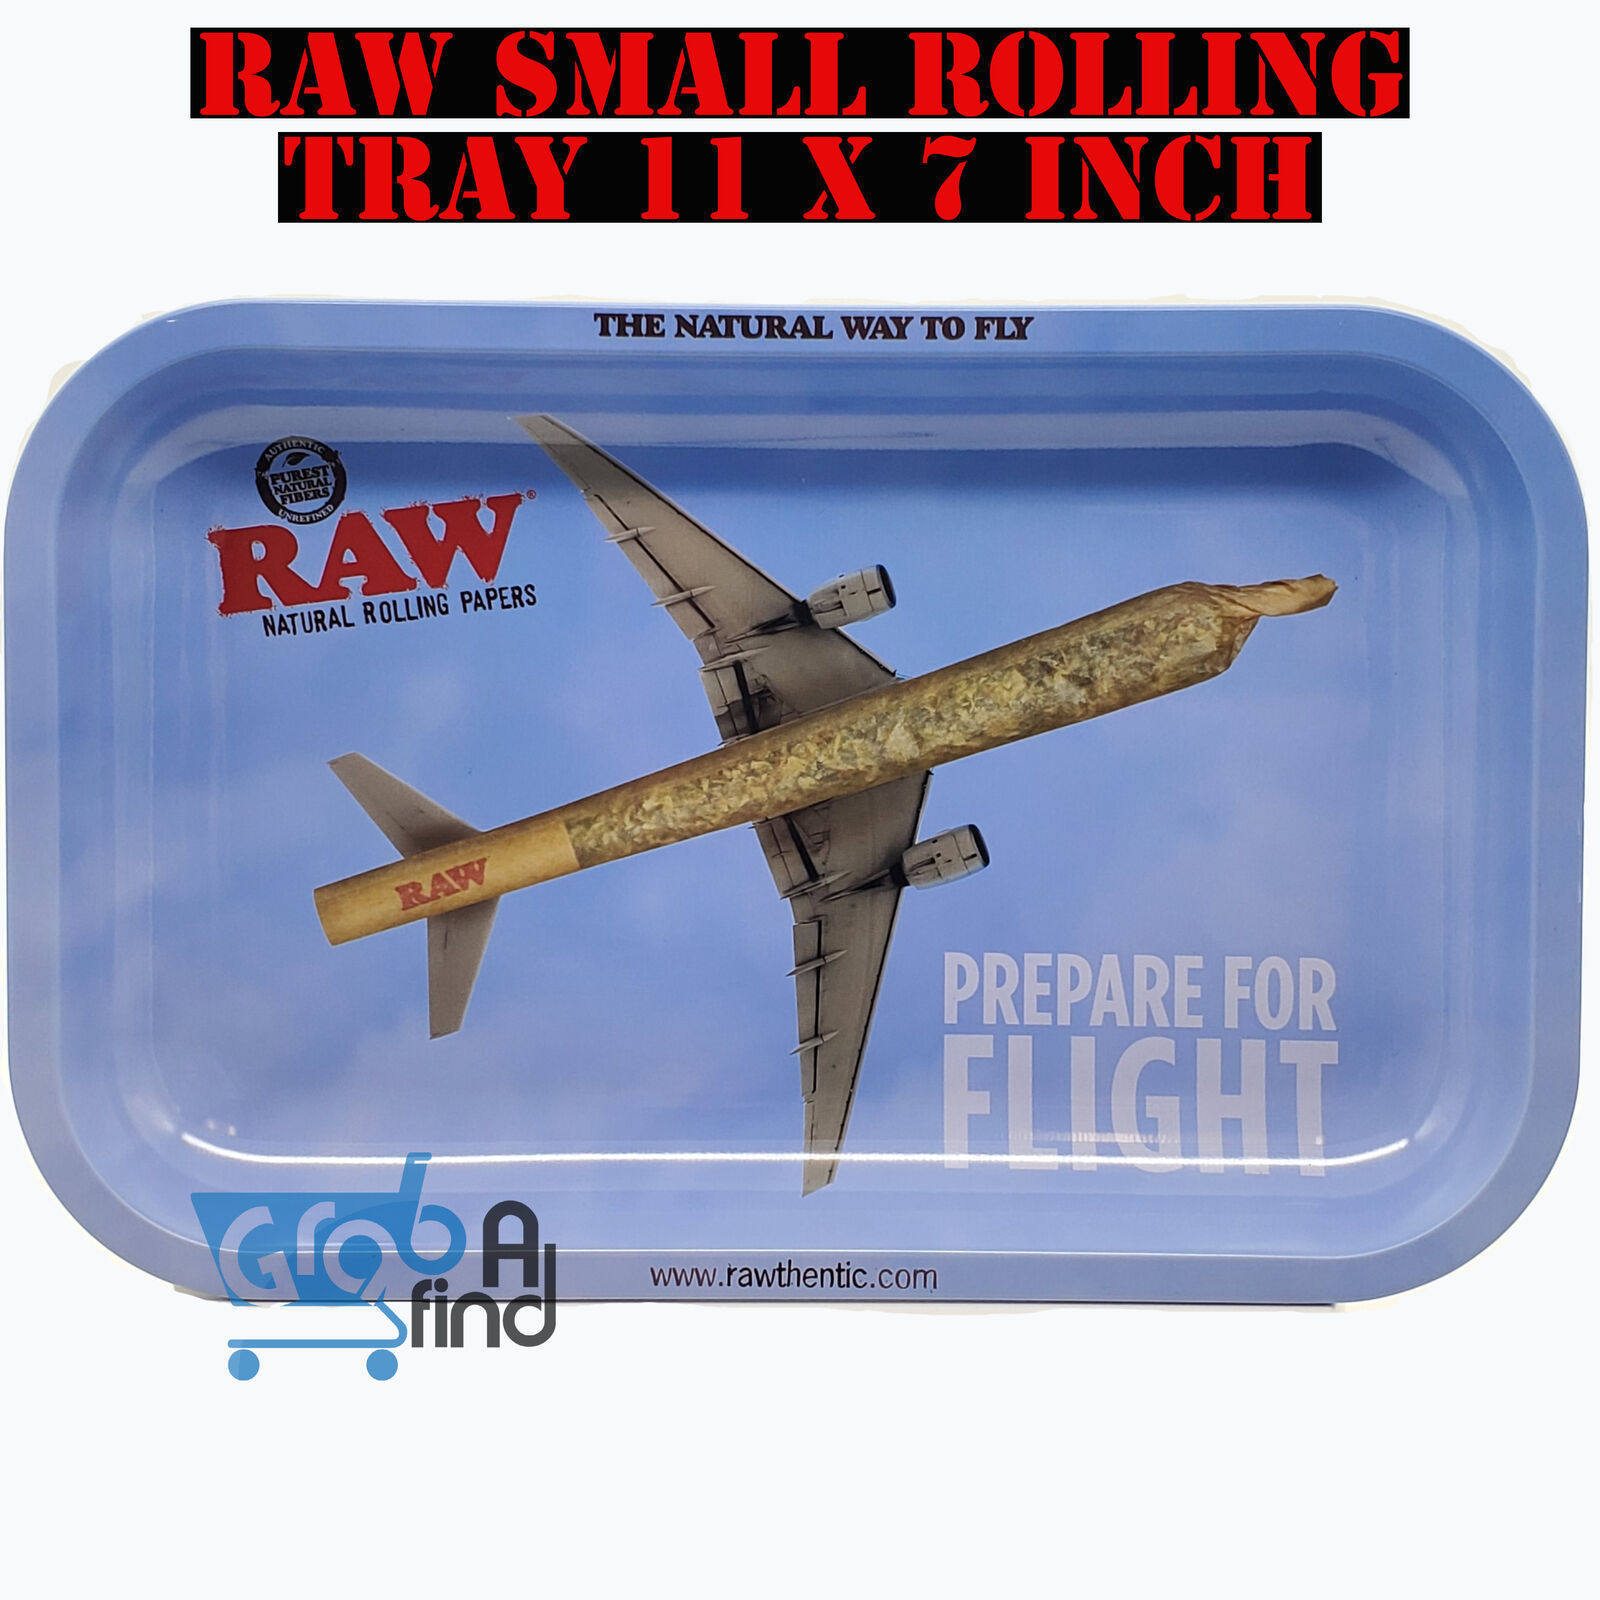 RAW Small Rolling Tray - Prepare for Flight - 11x7 Inch -  Authentic Raw Product